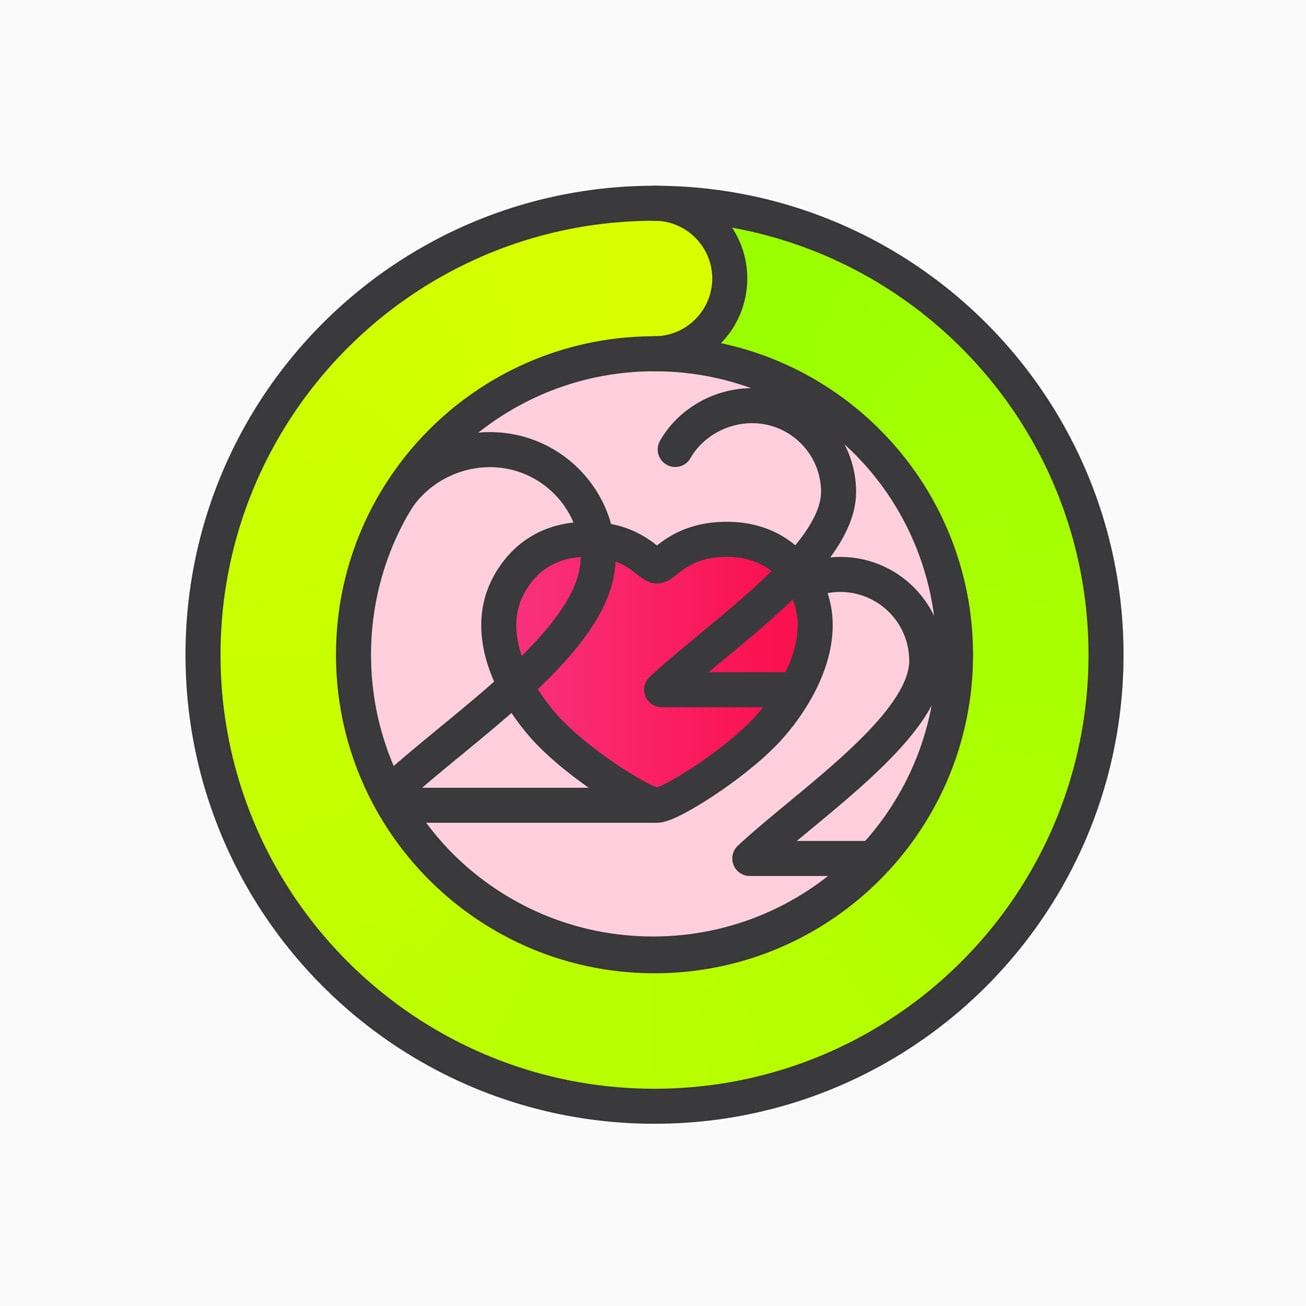 Apple Watch users can earn a special award for Heart Month on February 14.